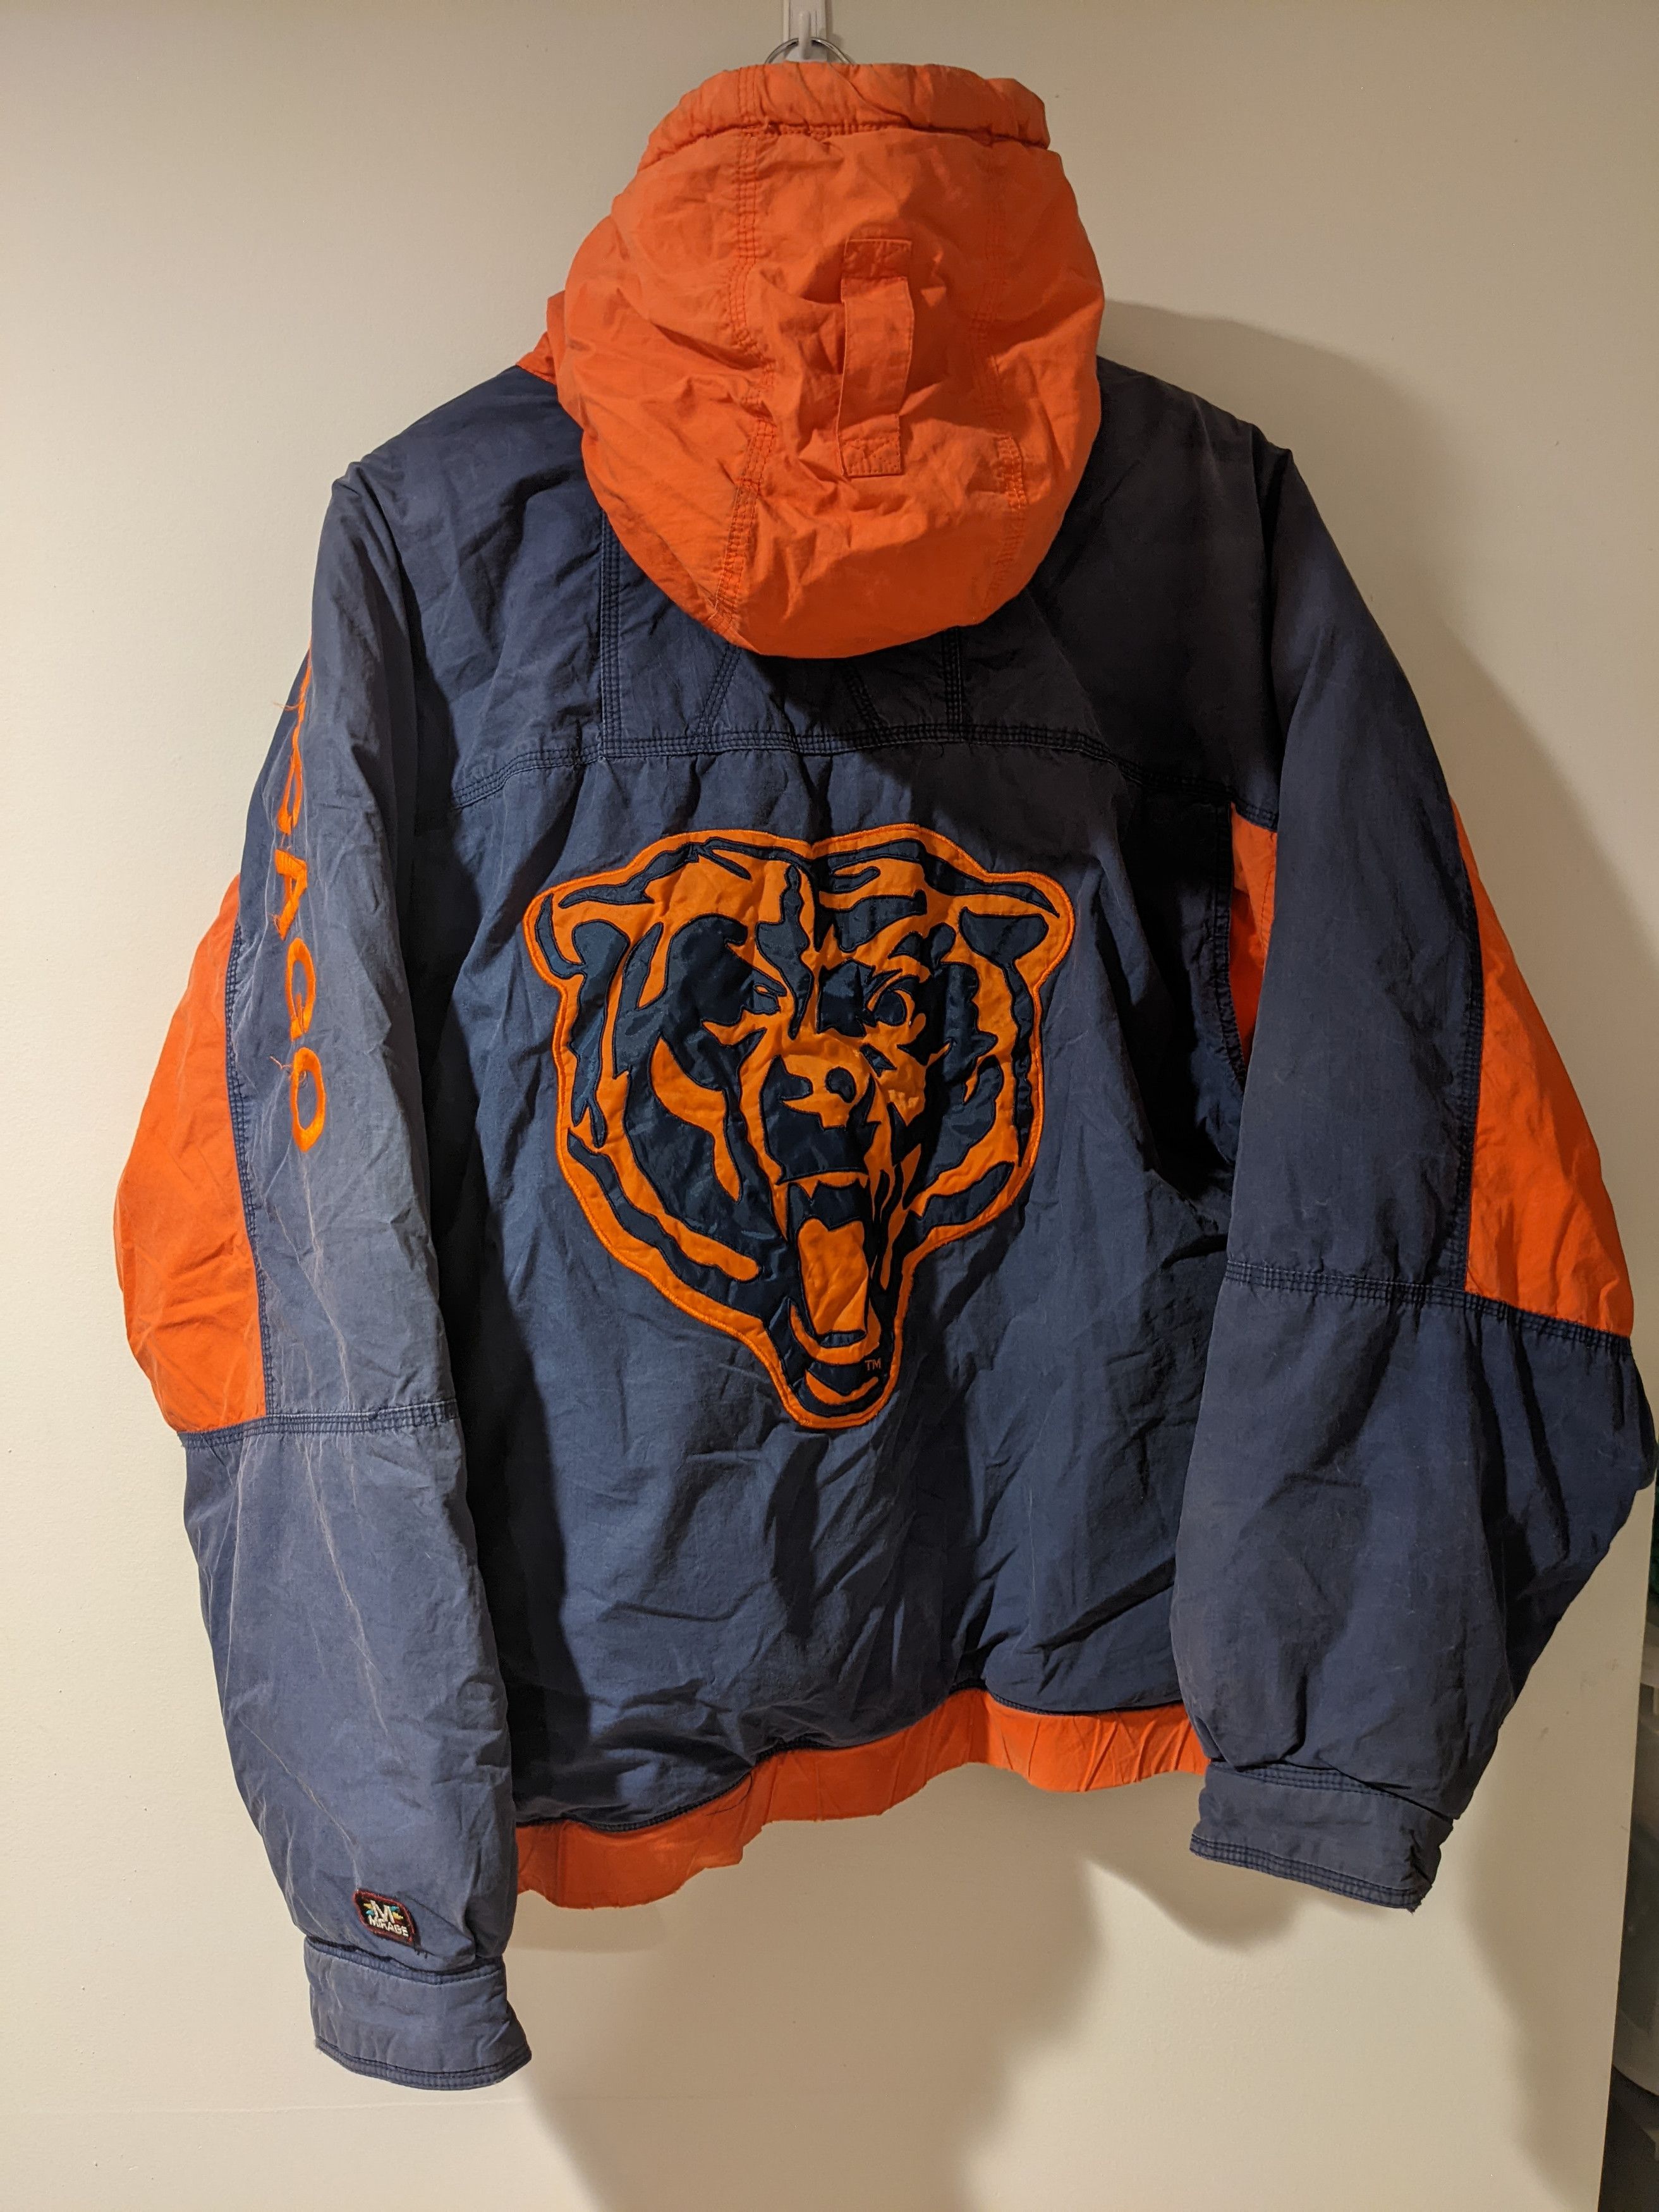 Vintage Vintage Mirage The Classic Collection Chicago Bears Jacket Size US XL / EU 56 / 4 - 2 Preview